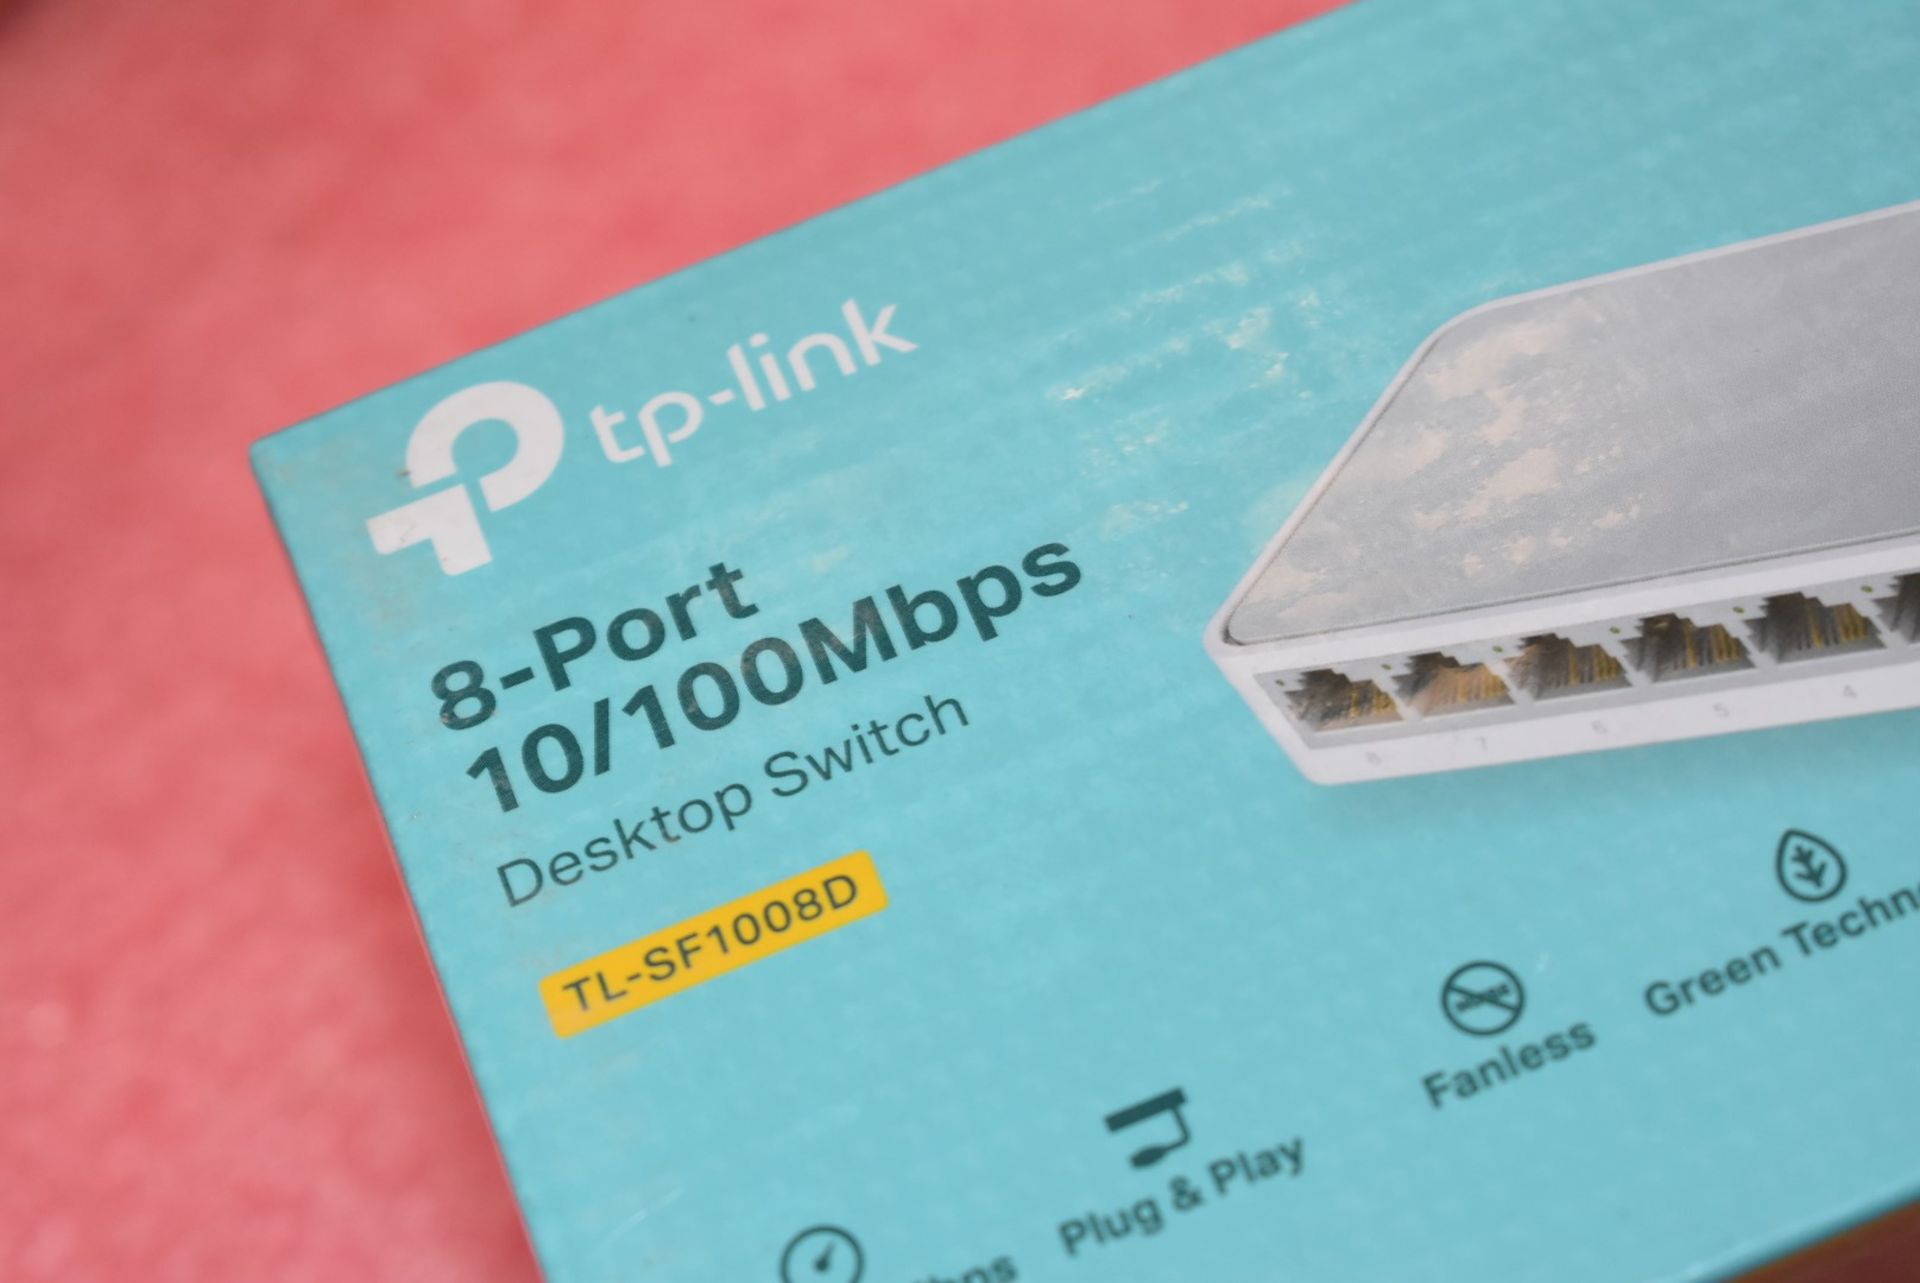 3 x TP Link 8 Port 10/100Mbos Desktop Switches - Model TL-SF1008D - New Sealed Stock - Image 4 of 6